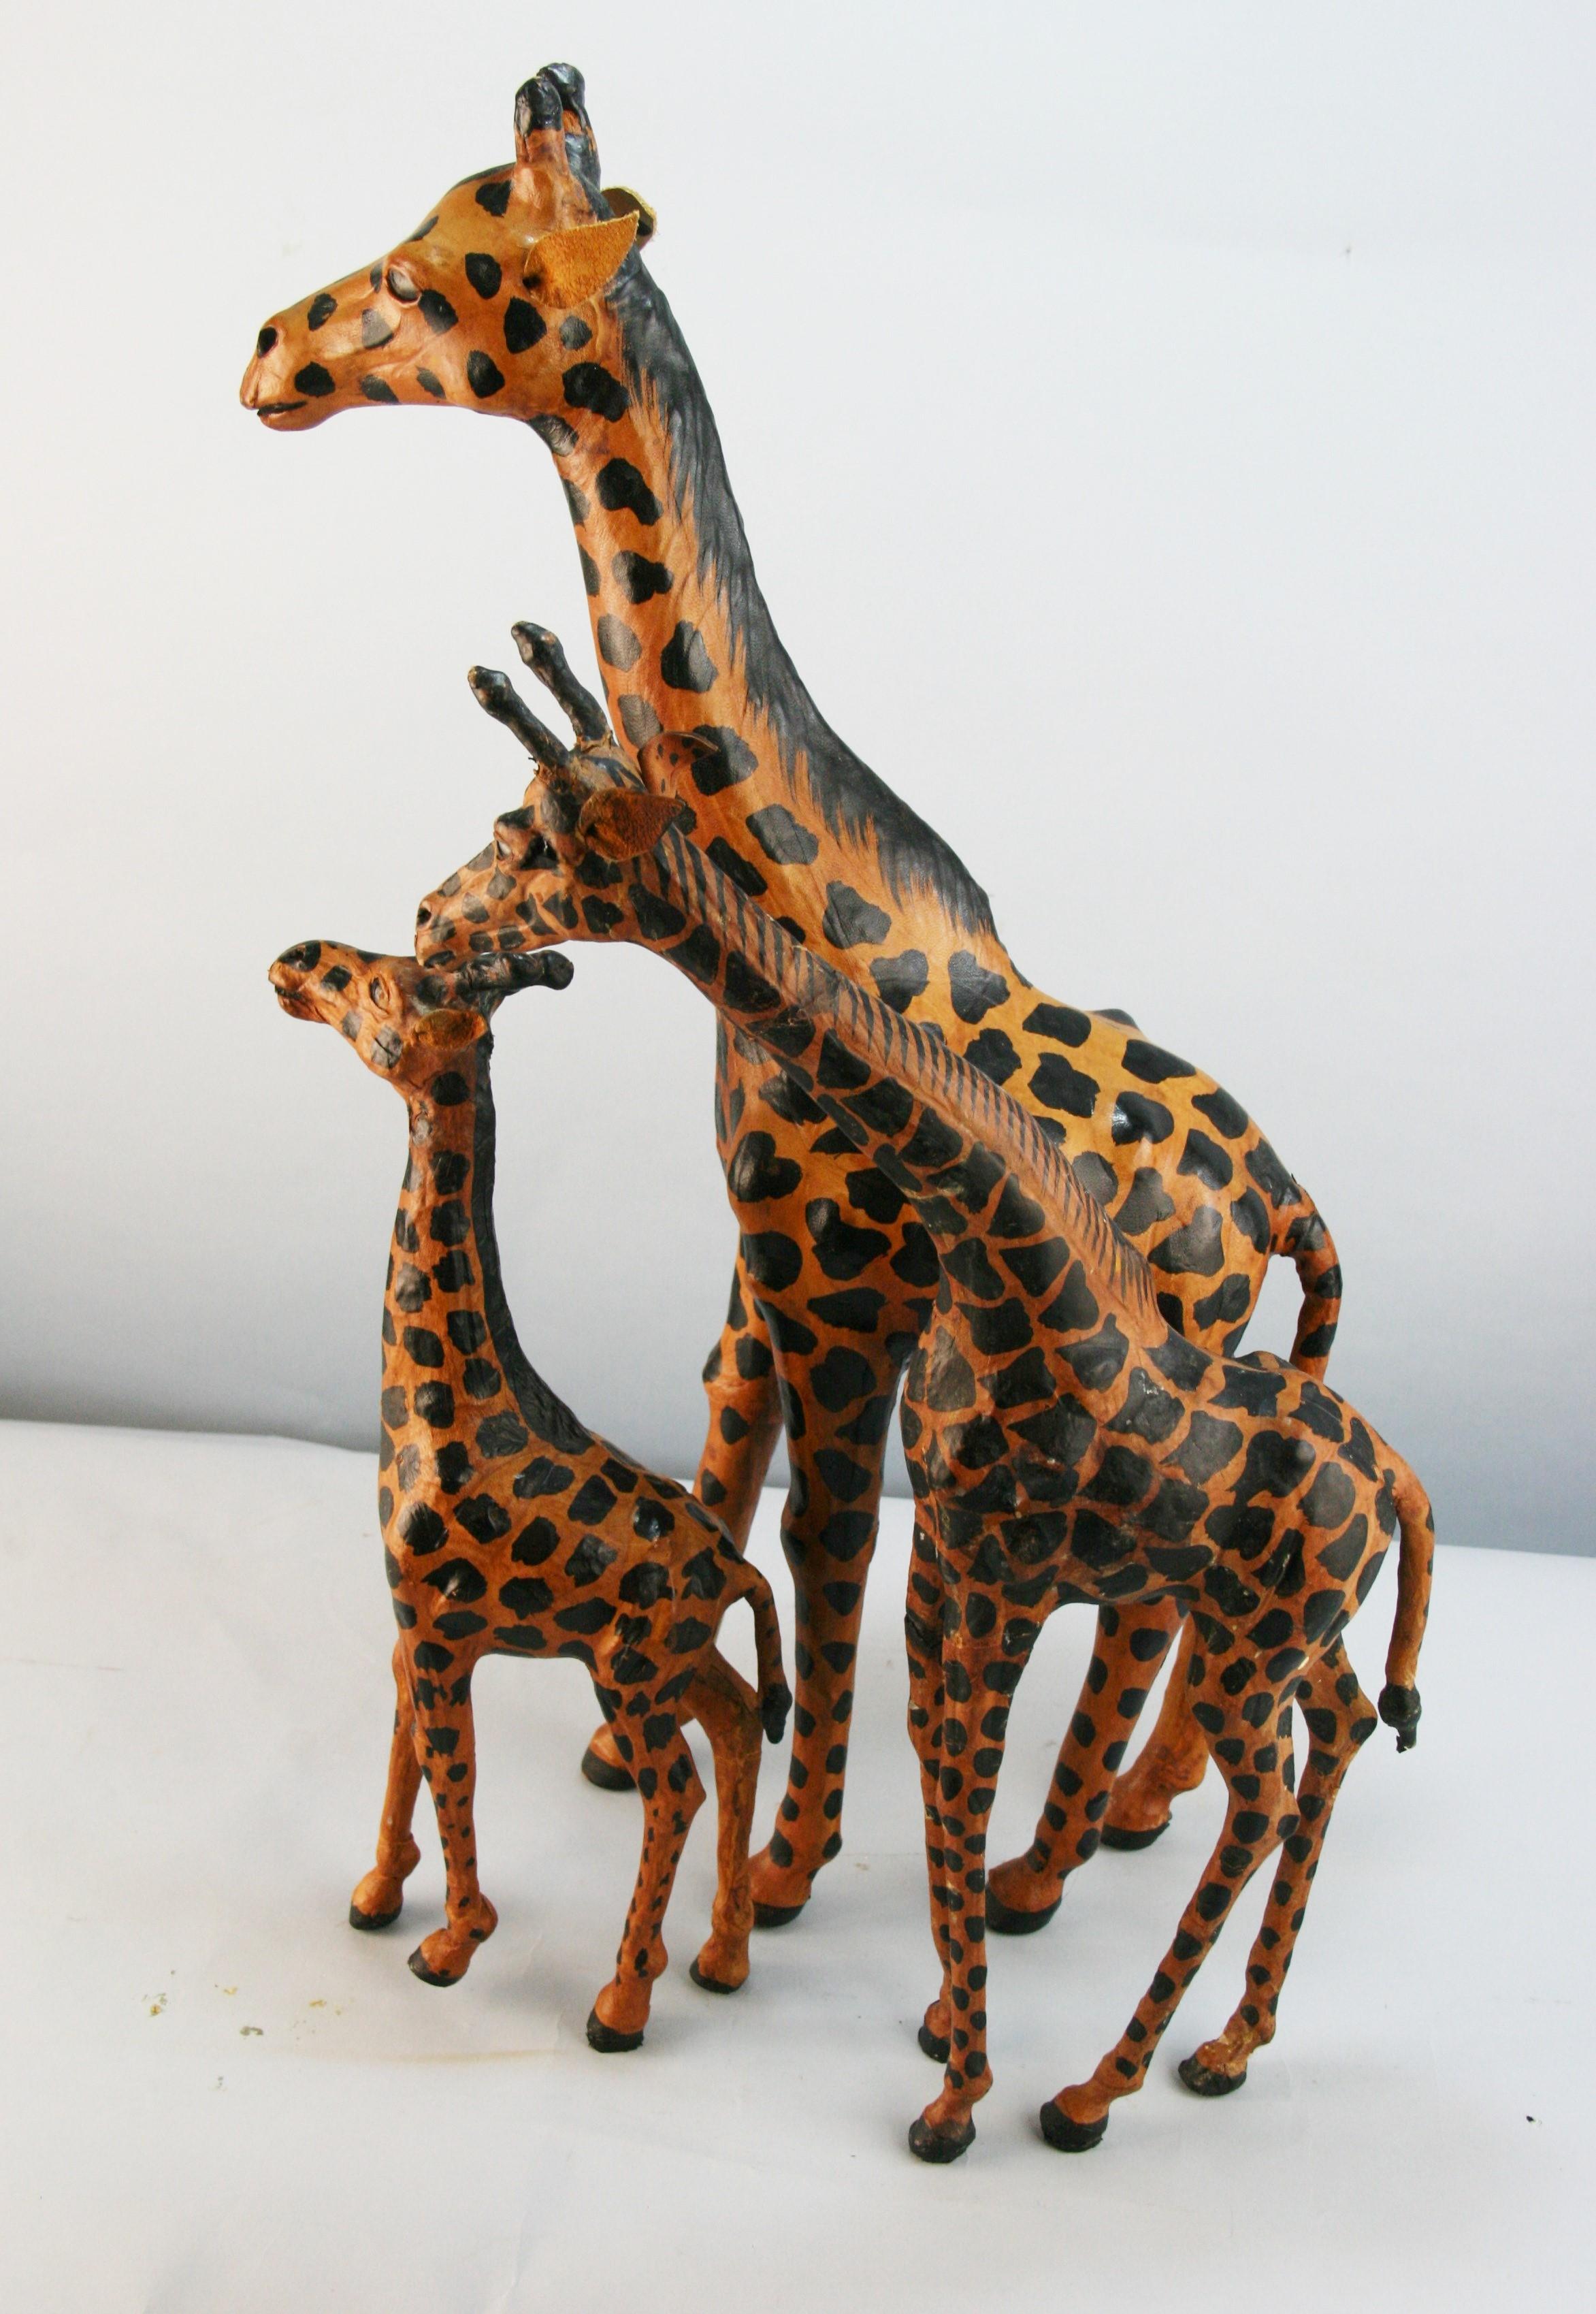 Family of 3 carved wood giraffes covered with hand painted leather
Large 5x15x24